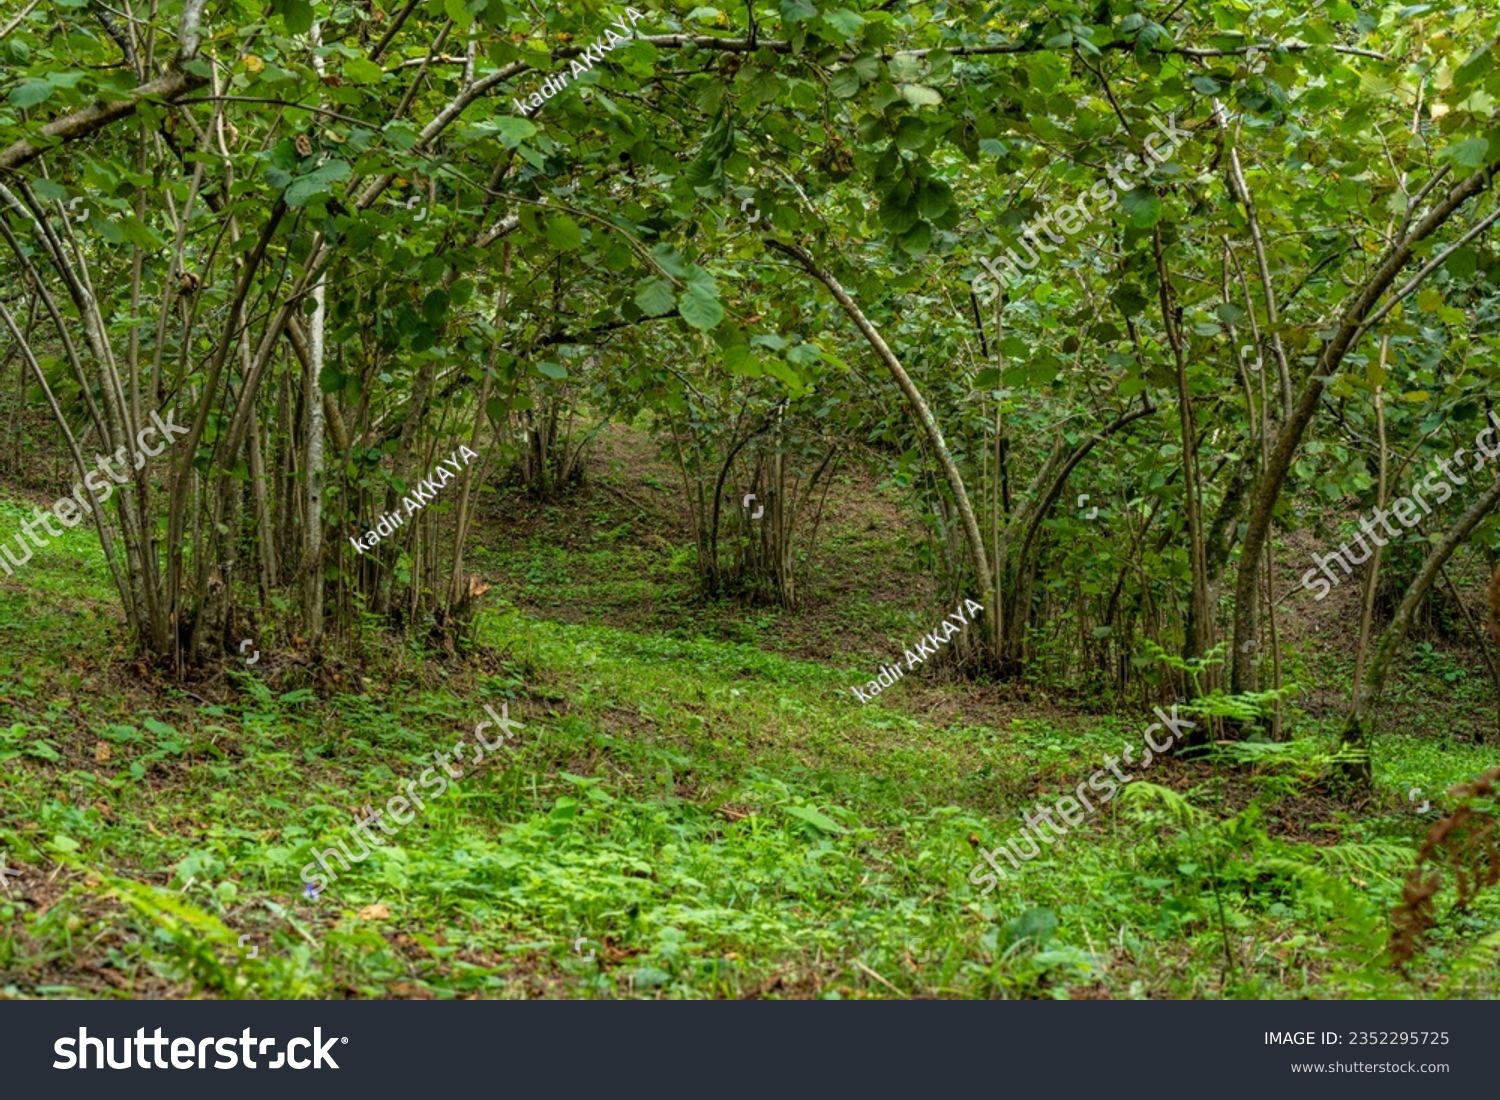     View of hazelnut orchards that play an active role in hazelnut production                            #2352295725